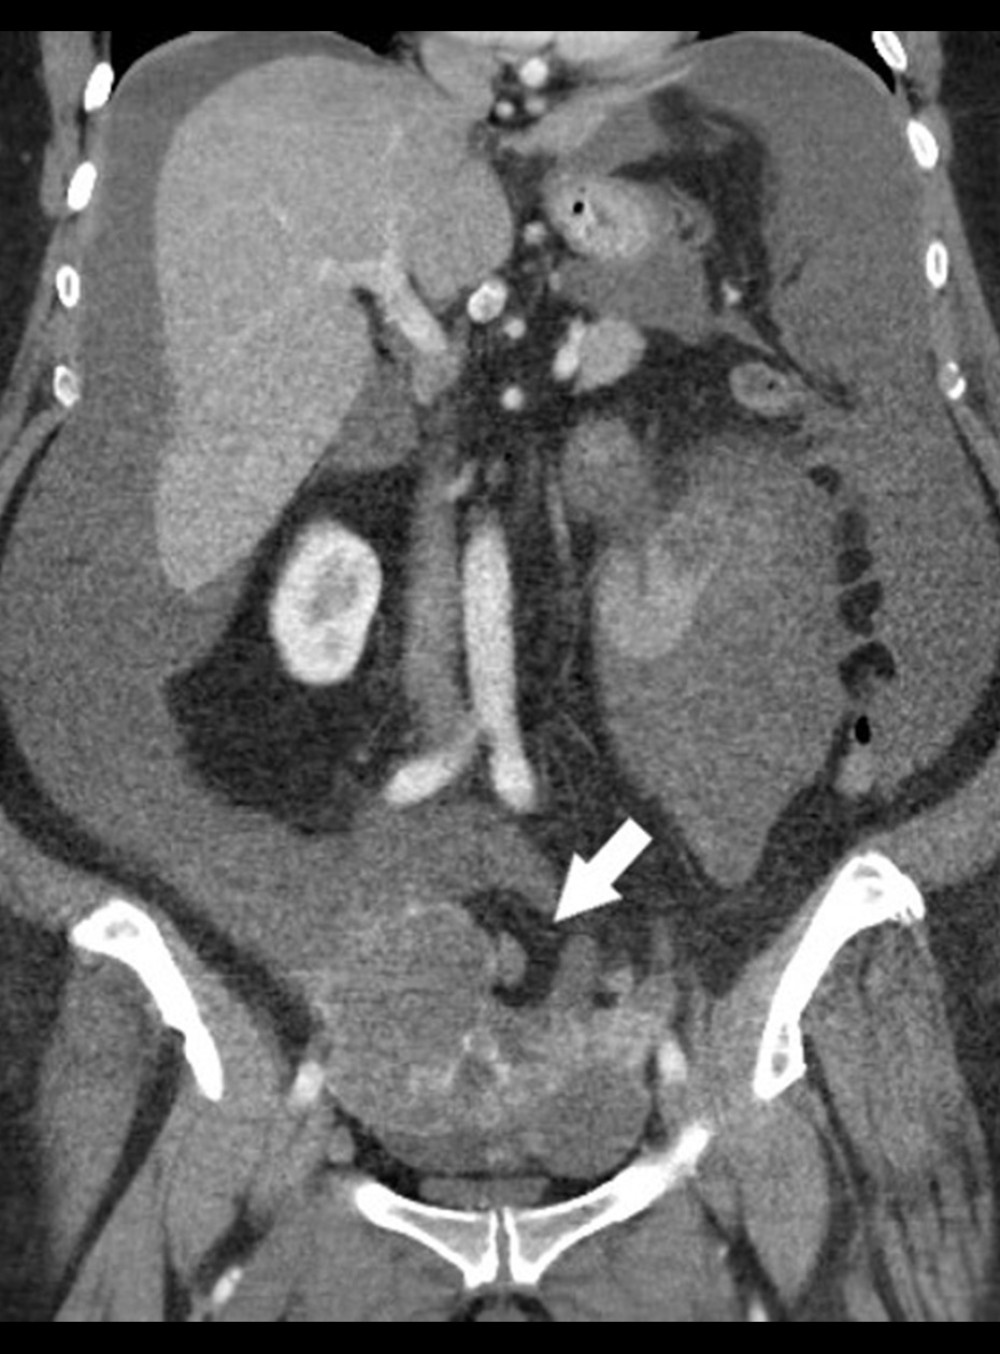 Coronal contrast-enhanced CT shows large ascites throughout the abdomen, displacing the organs centrally as well as the large cystic/solid ovarian mass (white arrow) in the pelvis. CT – computed tomography.